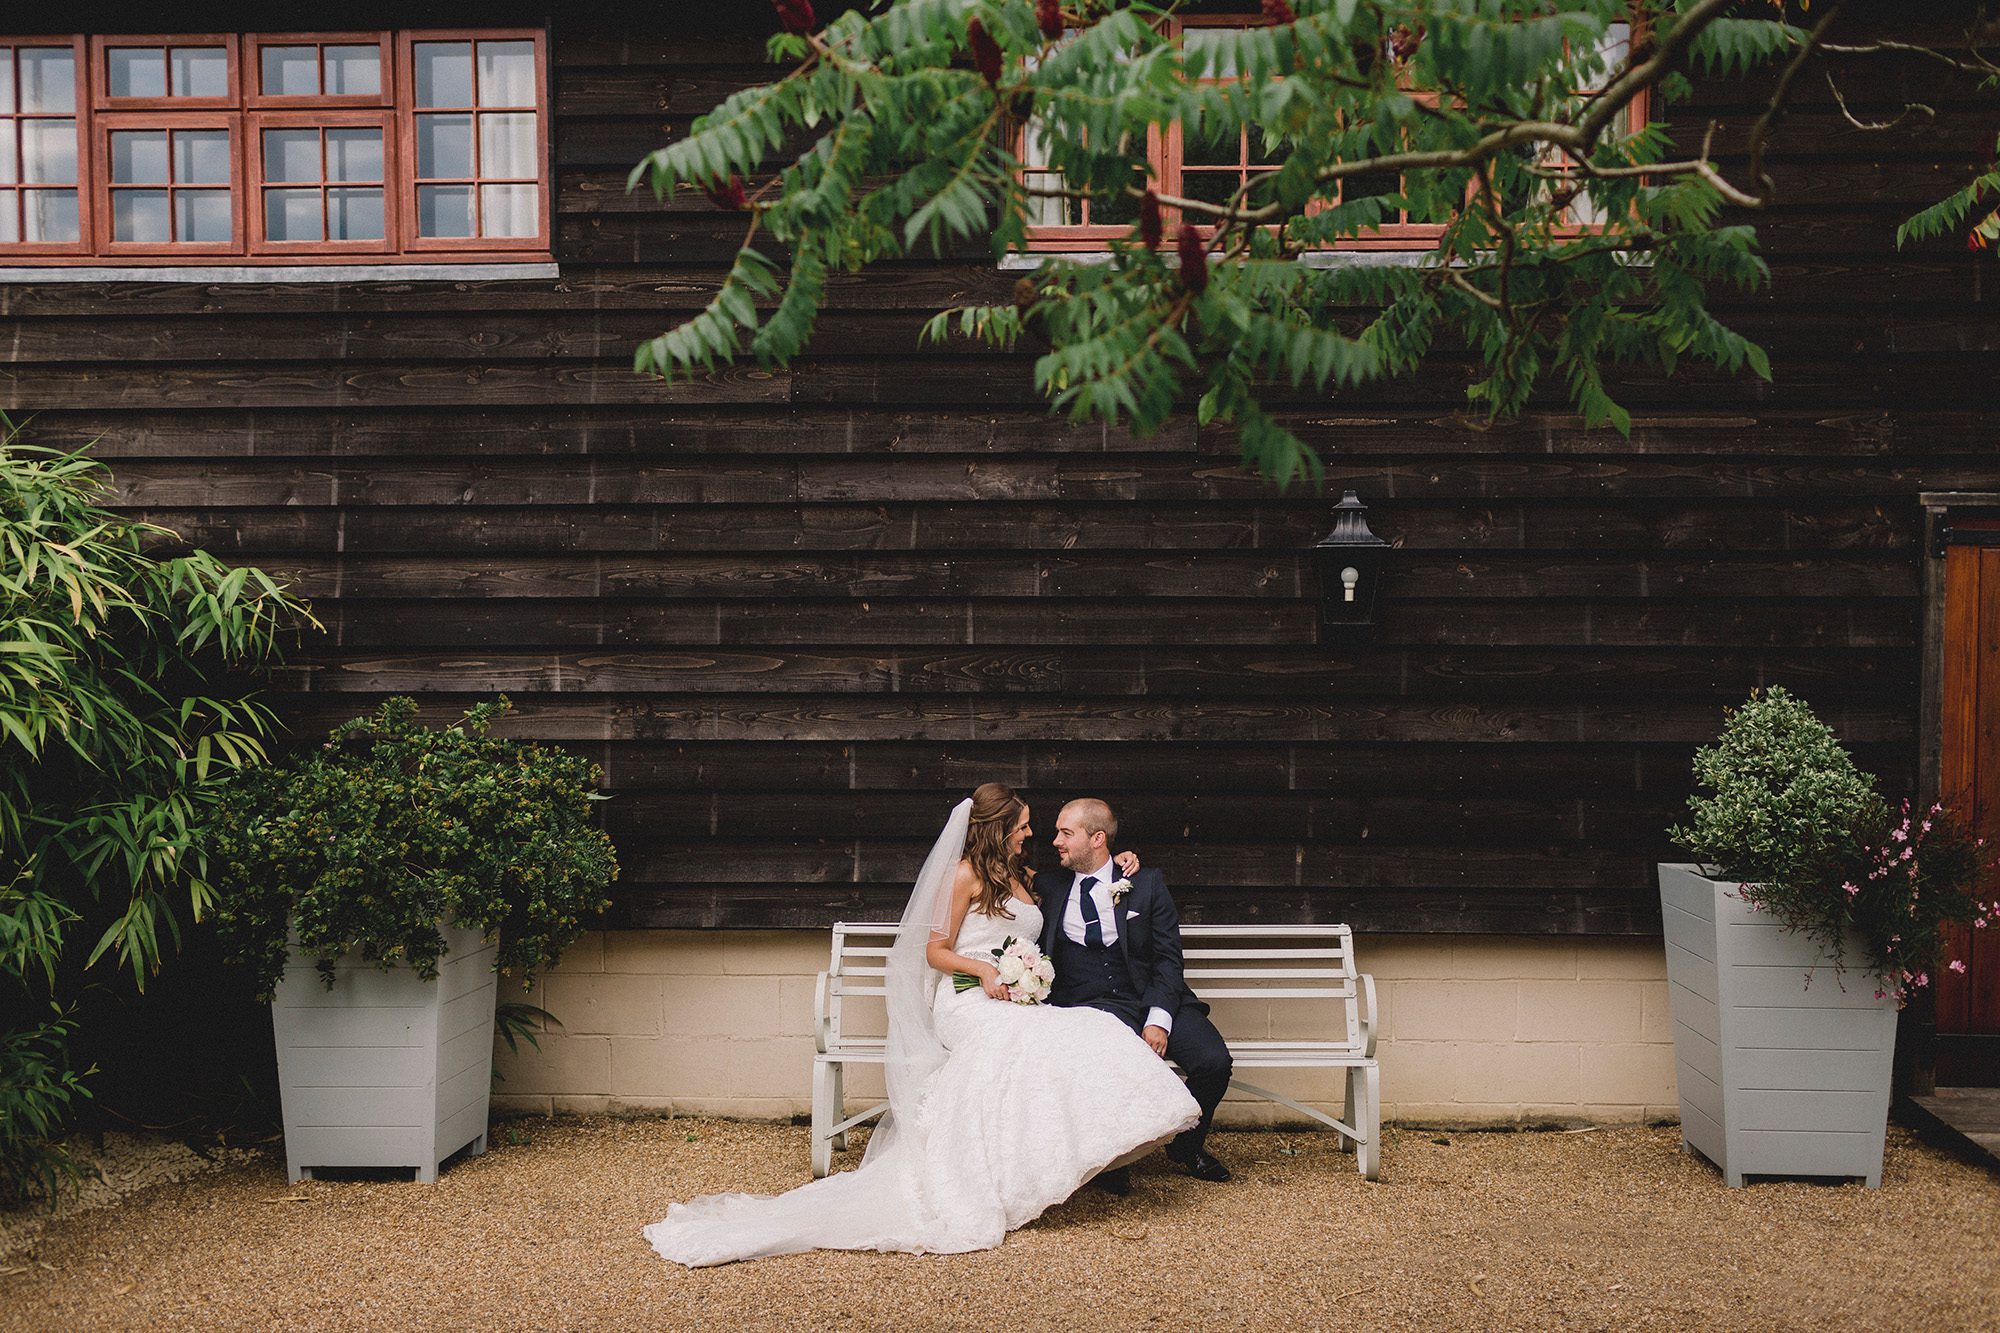 Bride and groom hug closely as they sit on a bench at Gate Street Barn wedding venue.